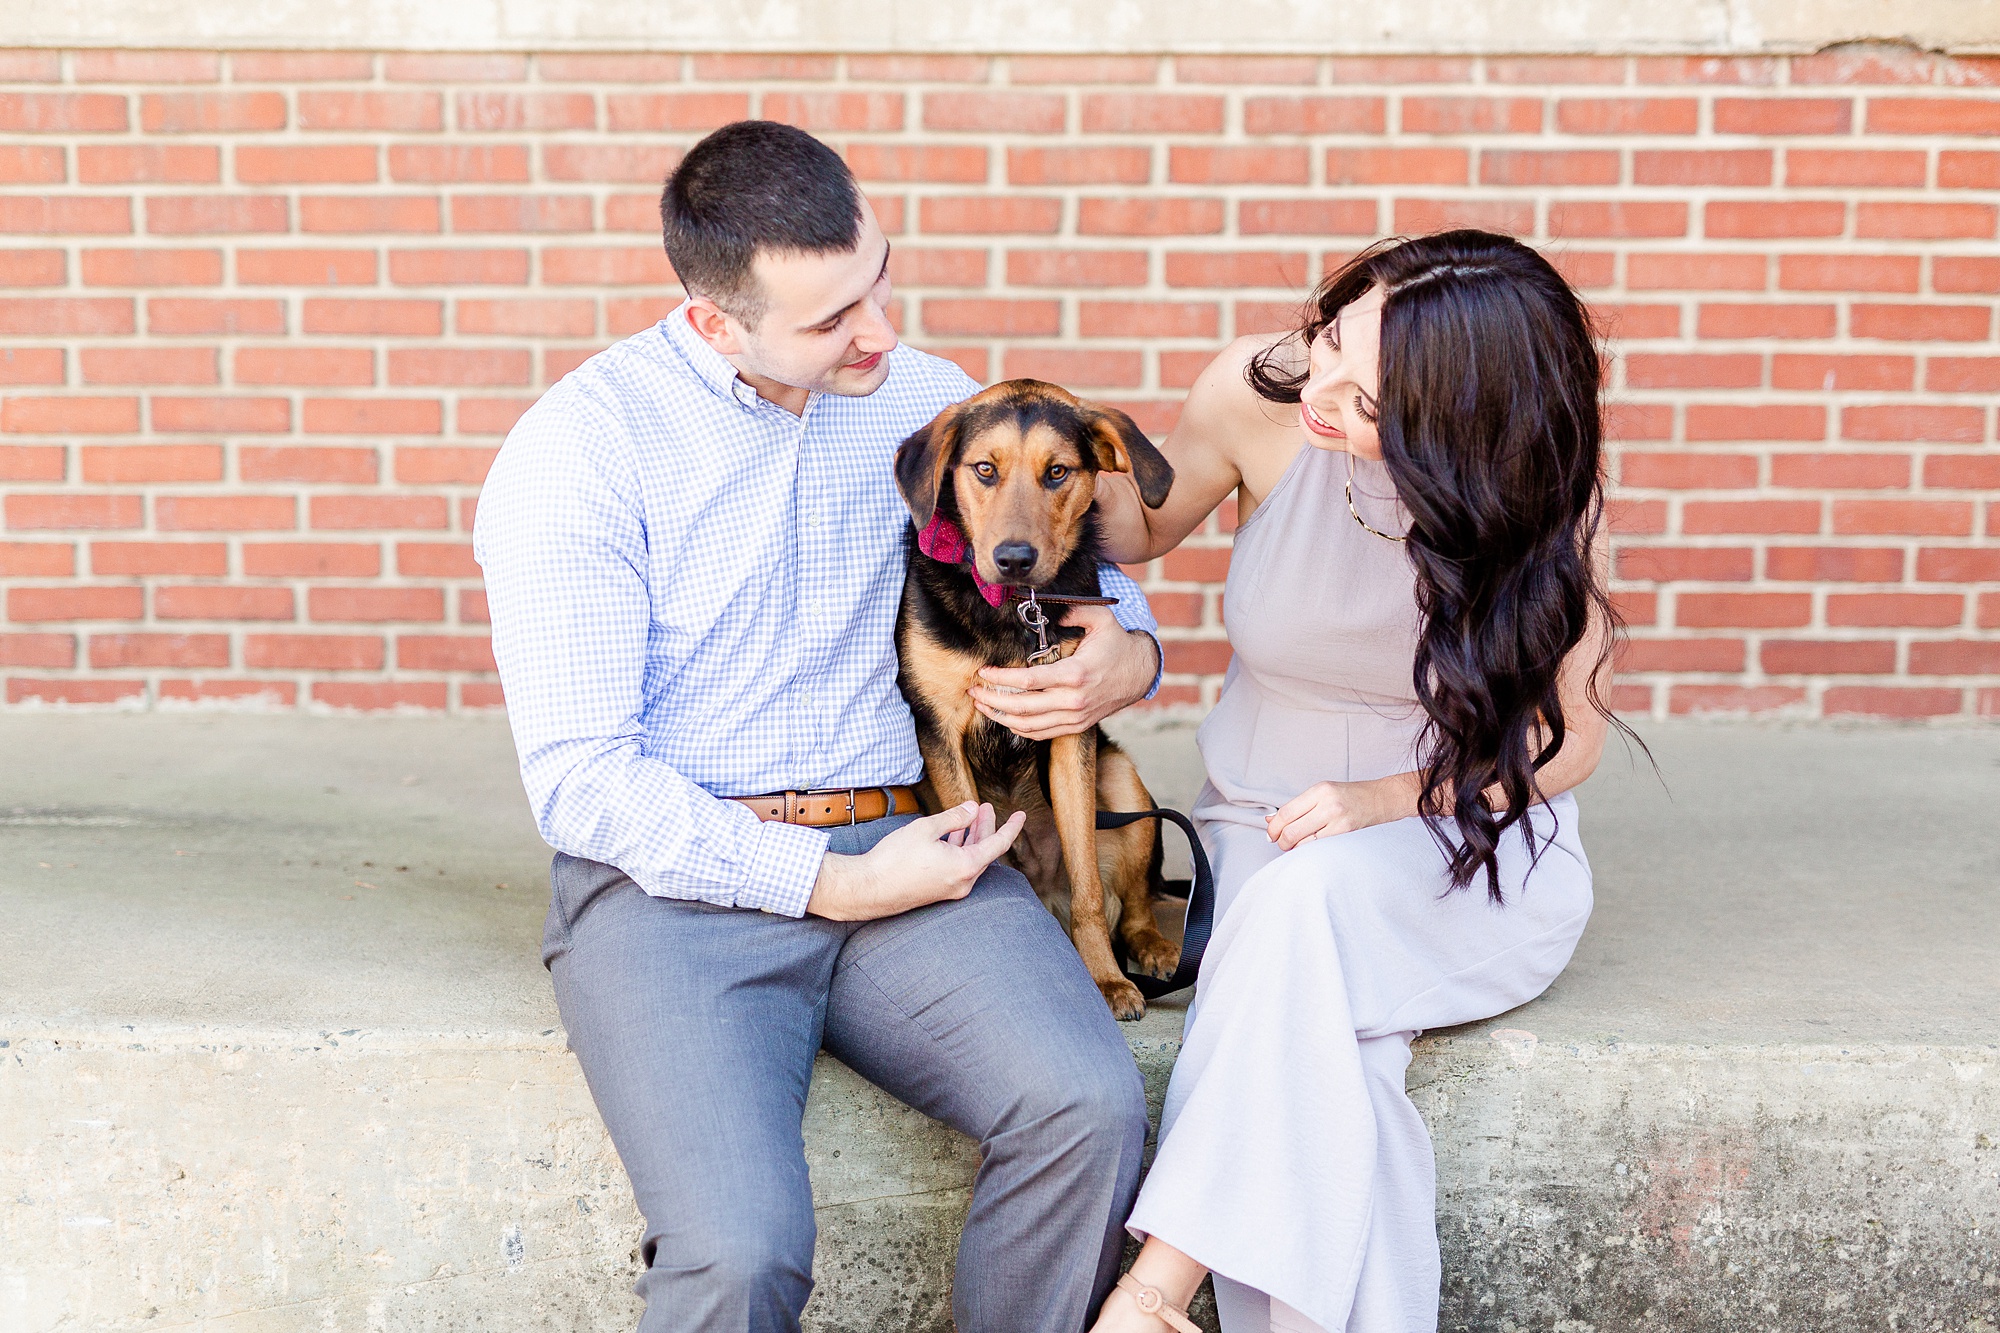 North Carolina couple plays with dog during CLT engagement photos